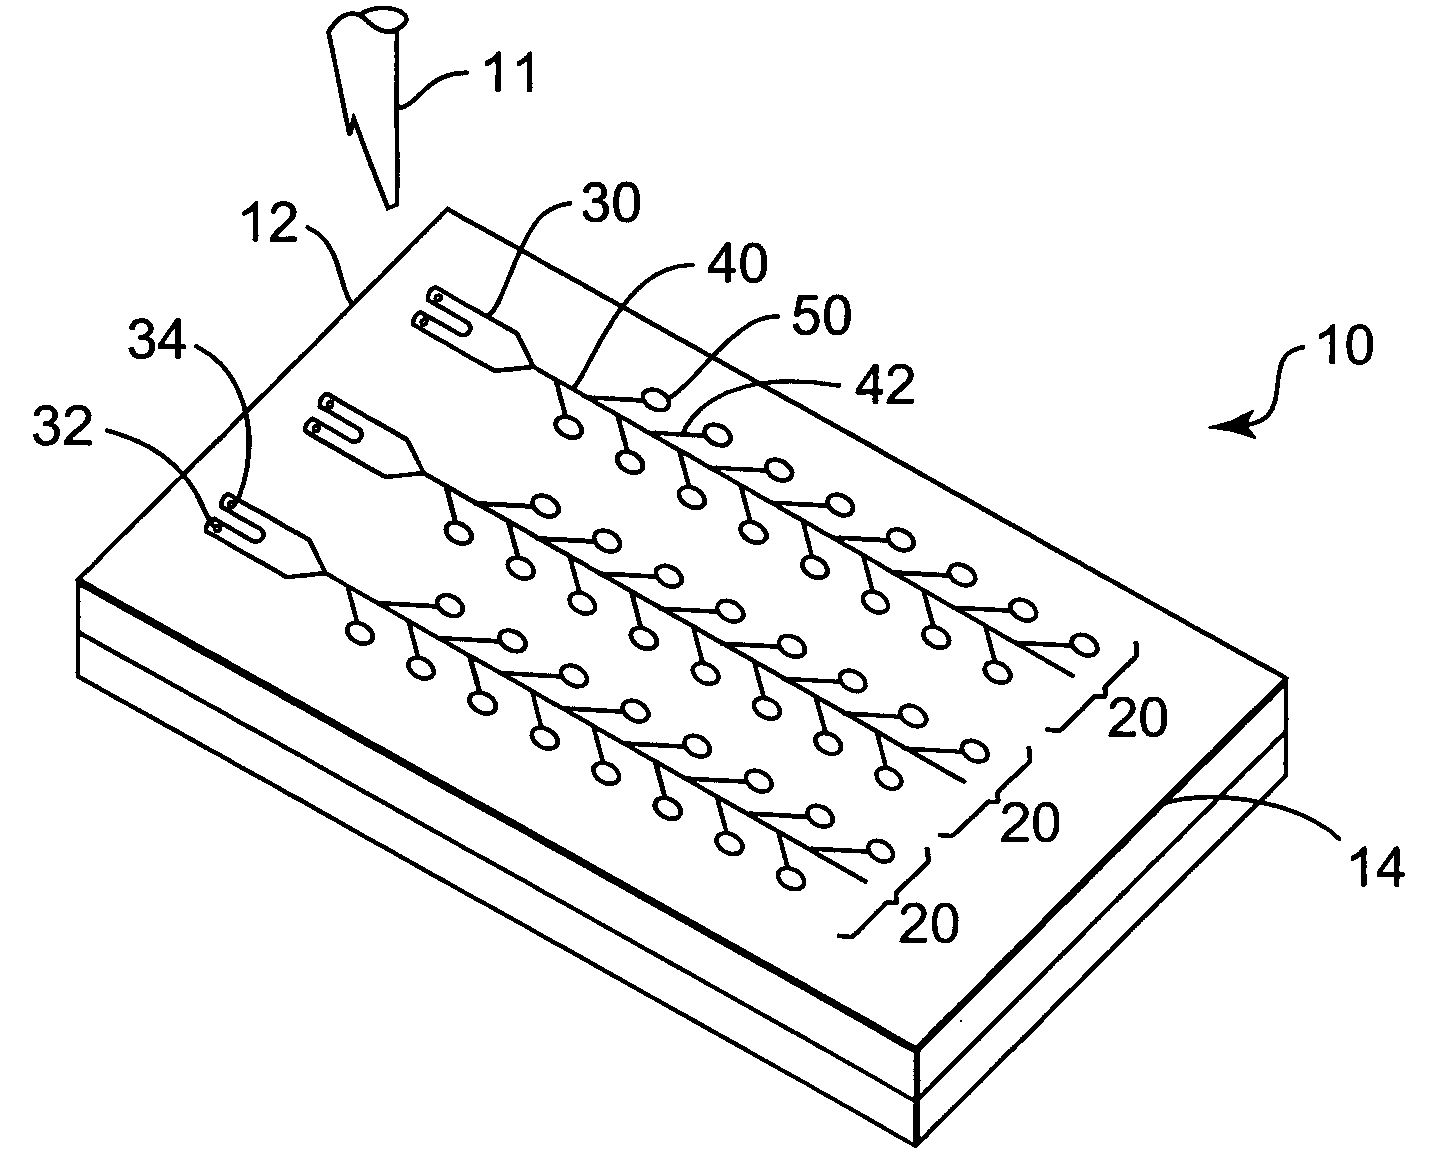 Sample processing devices and carriers